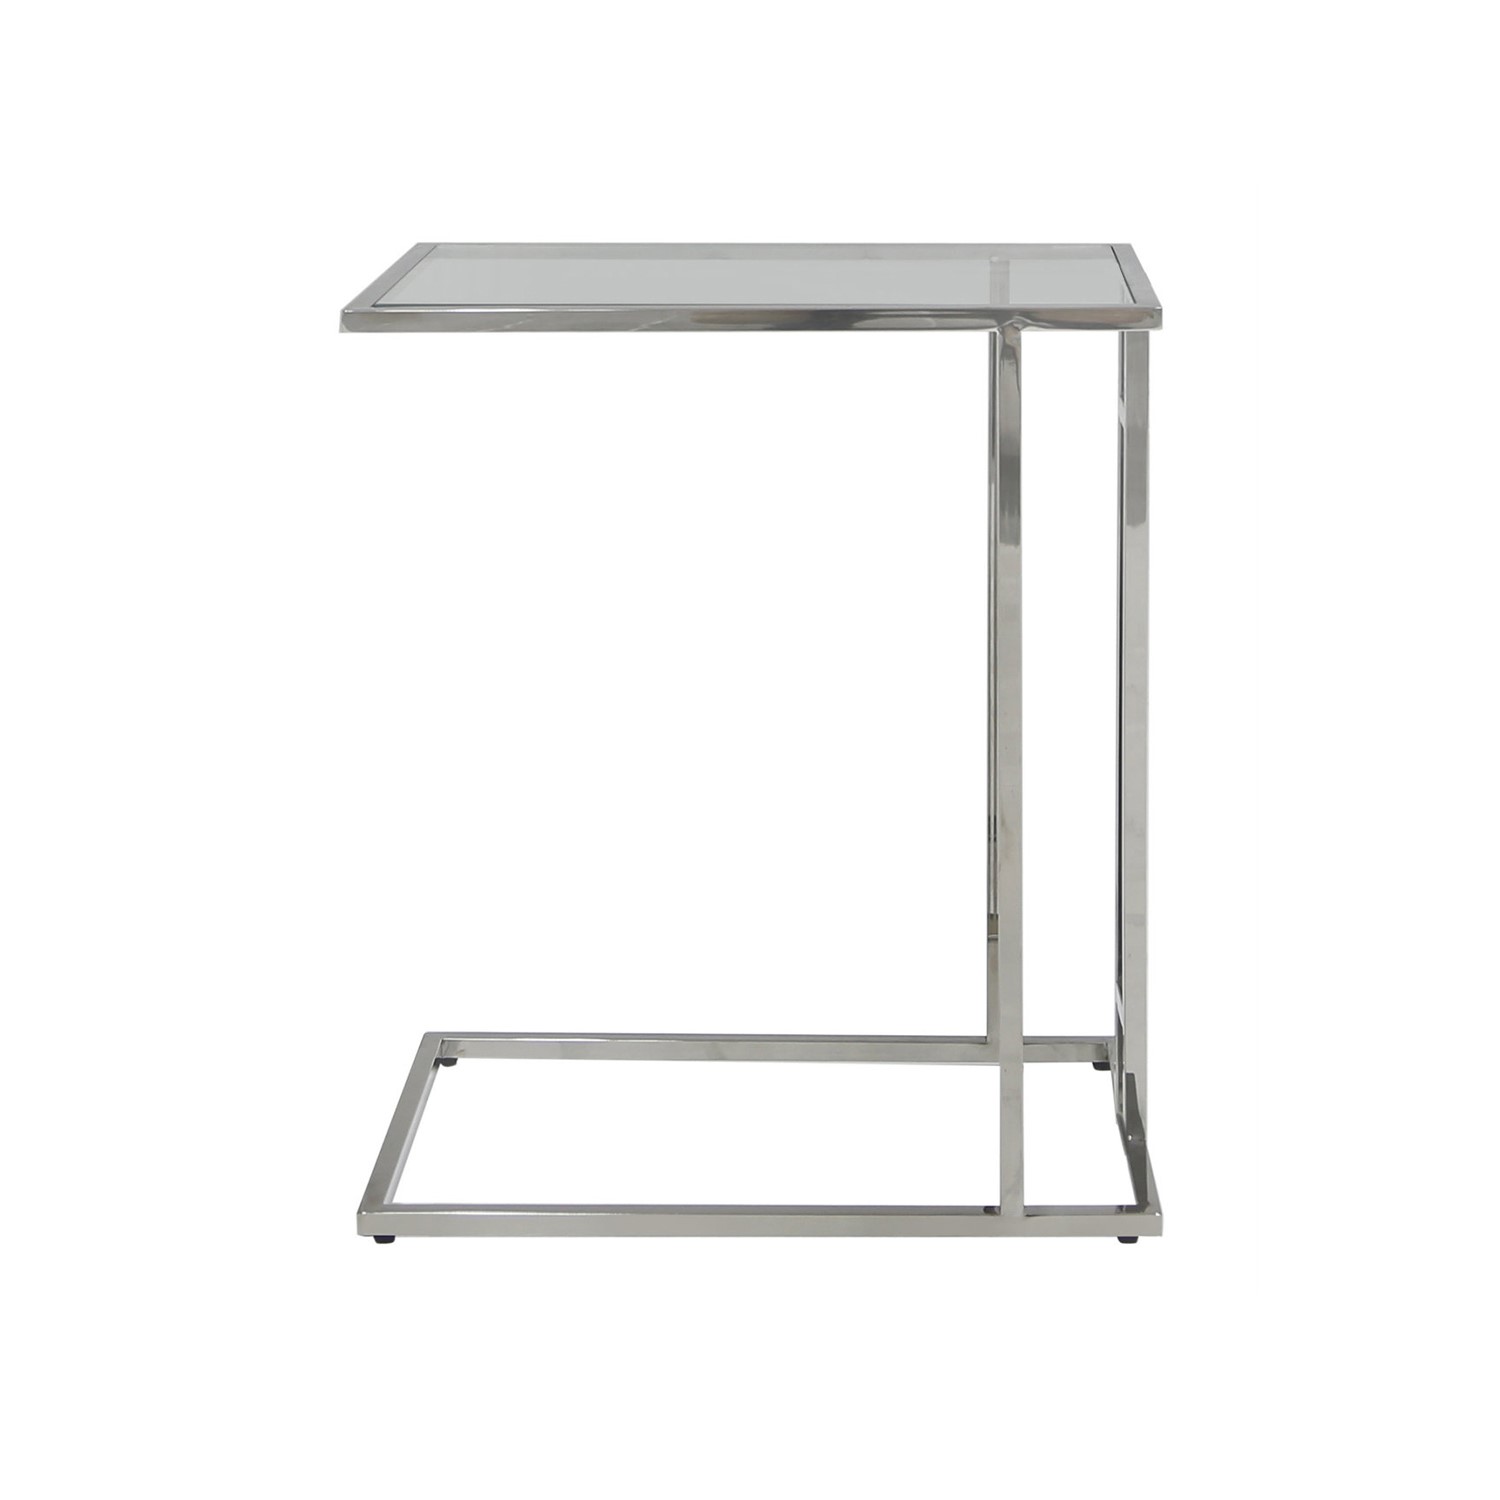 Read more about Harry stainless steel sofa table clear